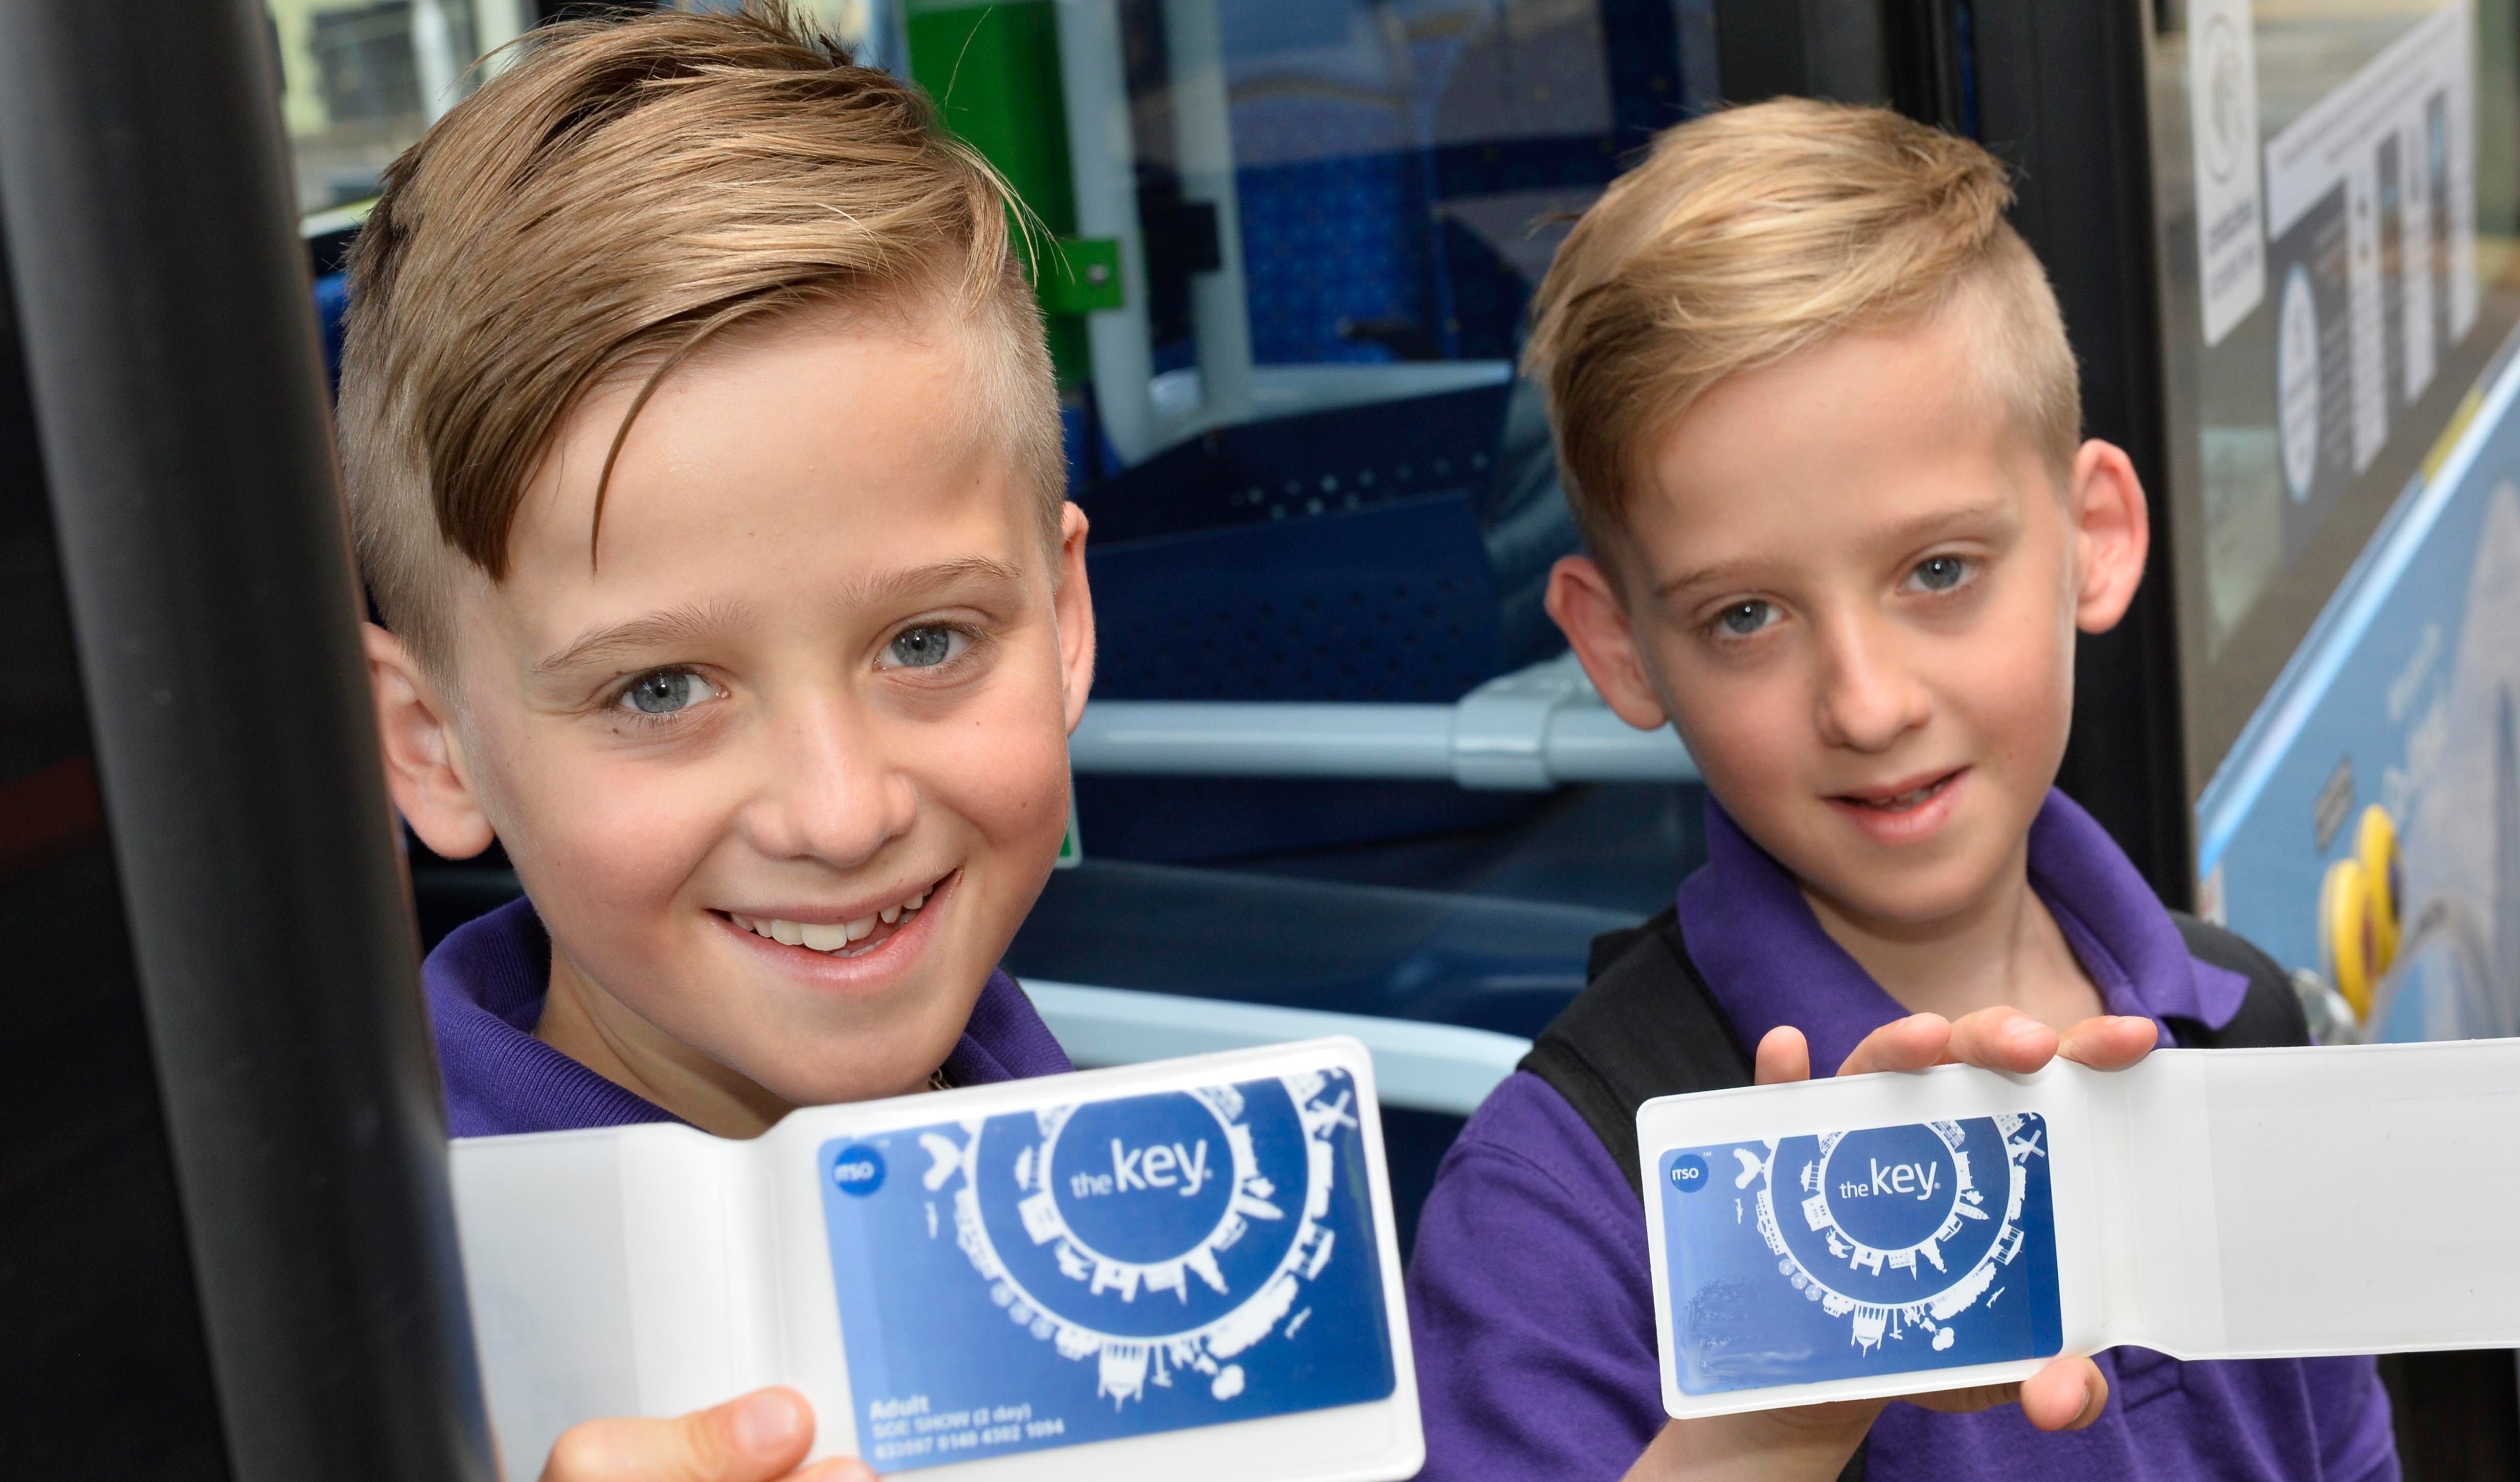 two children smiling at the camera holding key cards